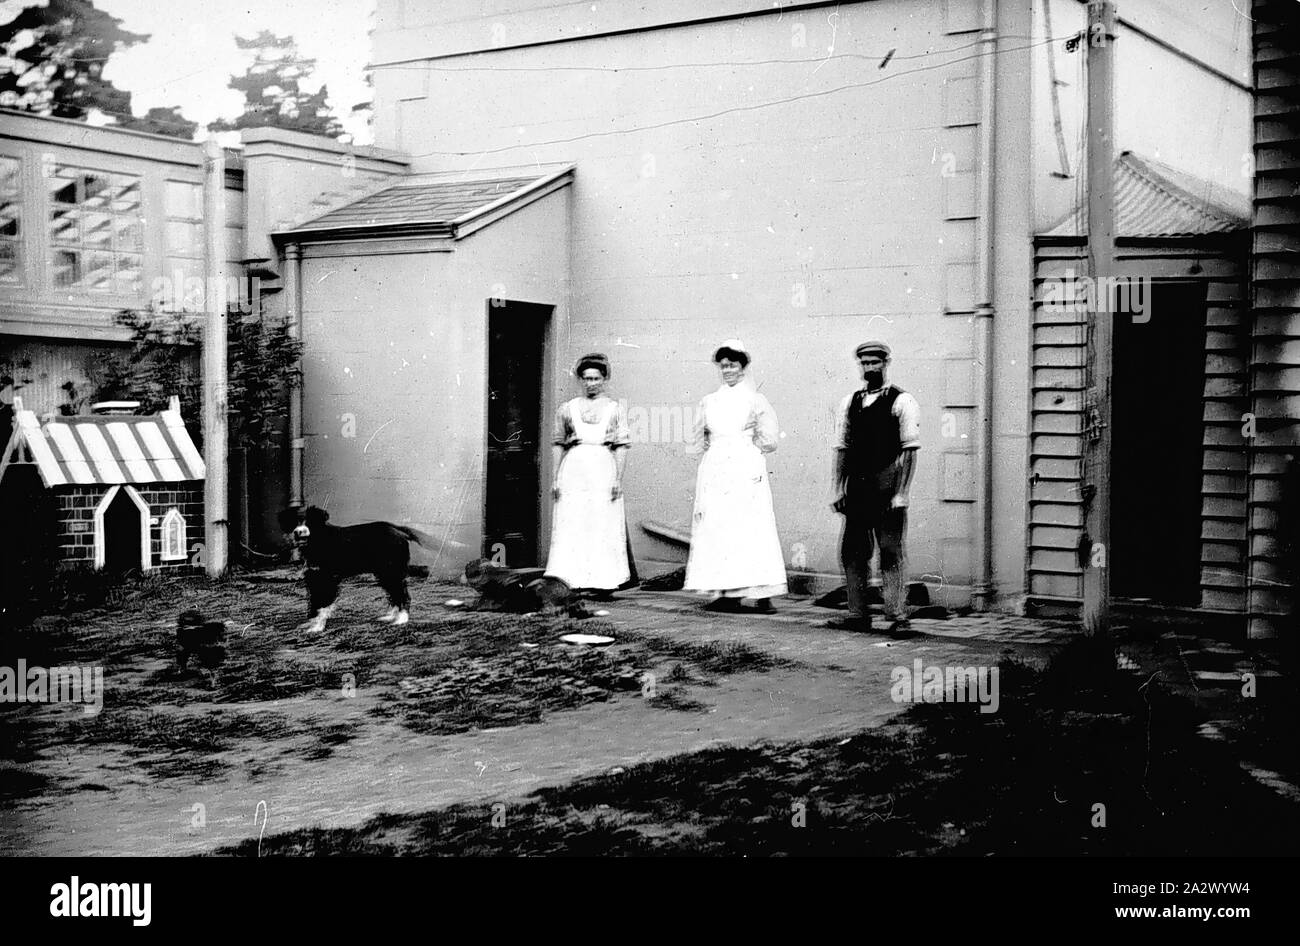 Negative - Housekeeper & Servants, 'Chelmer', St Kilda Road, South Yarra, Victoria, 1907, Housekeeper and domestic staff at 'Chelmer', residence of Thomas Beckett at 340 St Kilda Road, South Yarra, 1907. The housekeeper is probably Olive Moore. Photograph by Thomas Beckett. PPart of a collection of glass plate negatives taken by Dr Thomas George Beckett, doctor, pioneering radiologist and amateur photographer between 1891 and 1910. The collection is primarily of Beckett's family Stock Photo